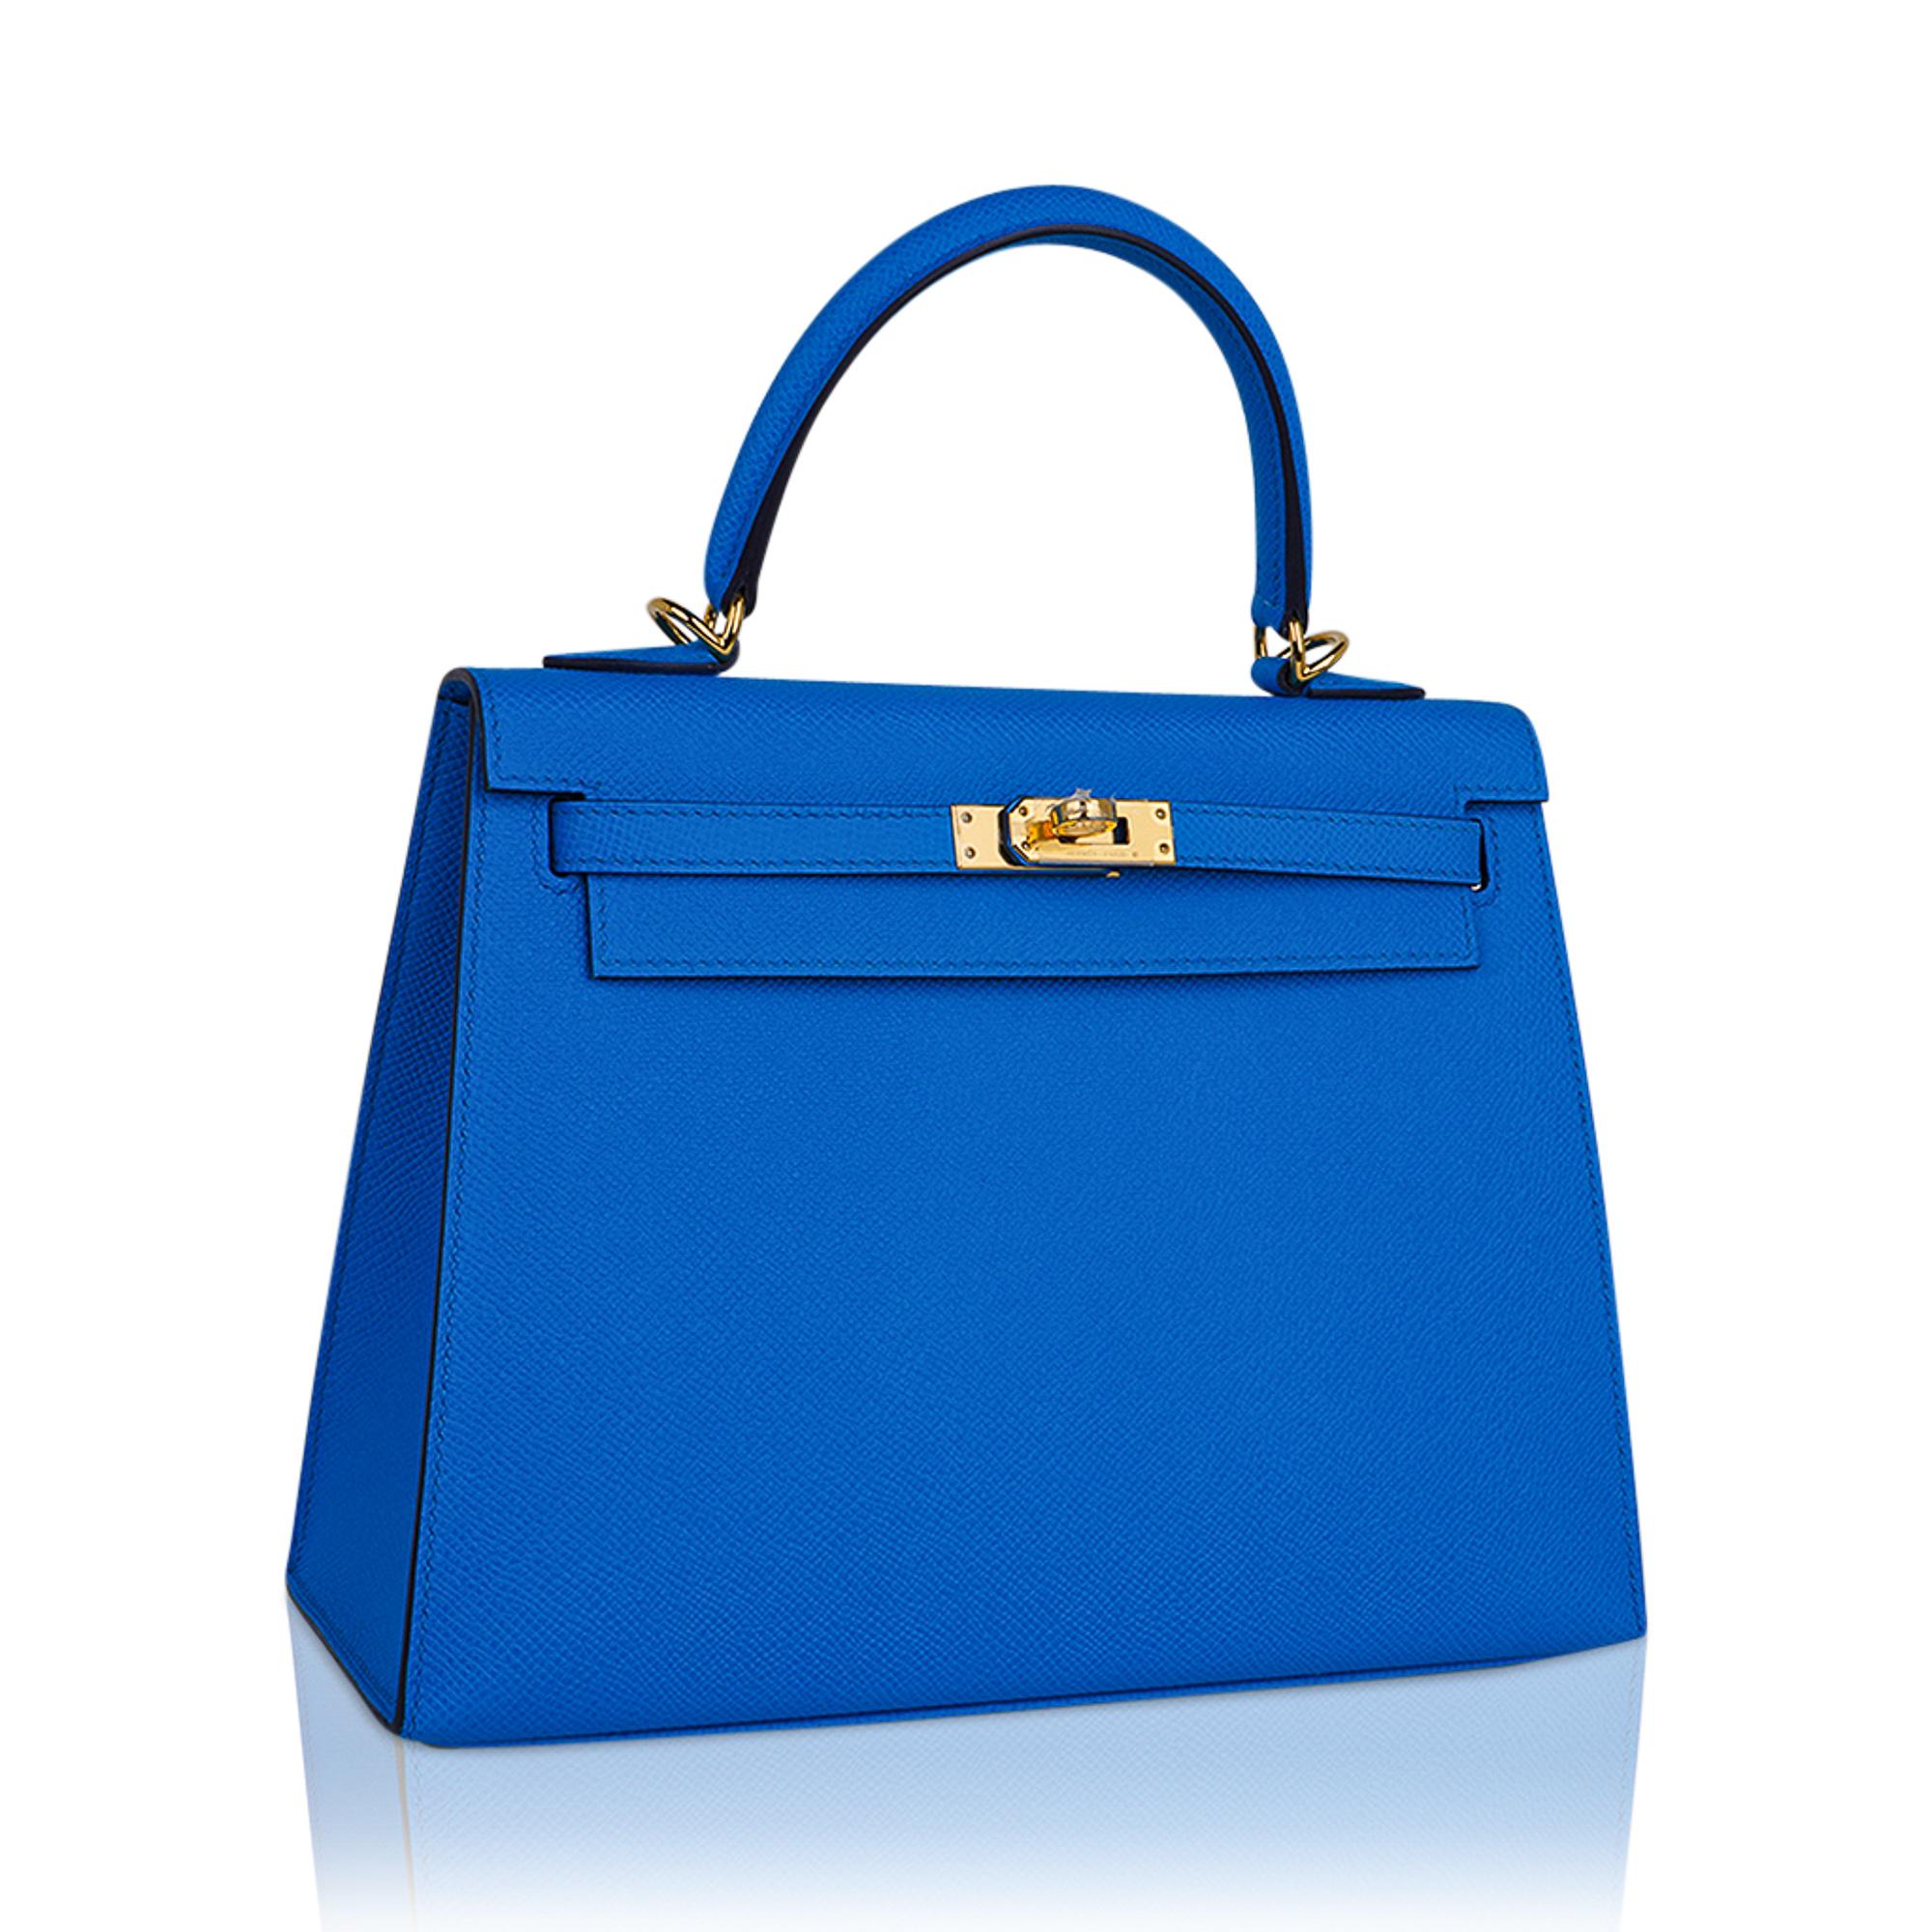 Mightychic offers an exquisite Hermes Kelly 25 Sellier bag featured in richly saturated Bleu Frida.
This exotic Hermes Kelly bag colour is a beautiful year round neutral.
Accentuated with gold hardware and epsom leather.
Comes with signature Hermes